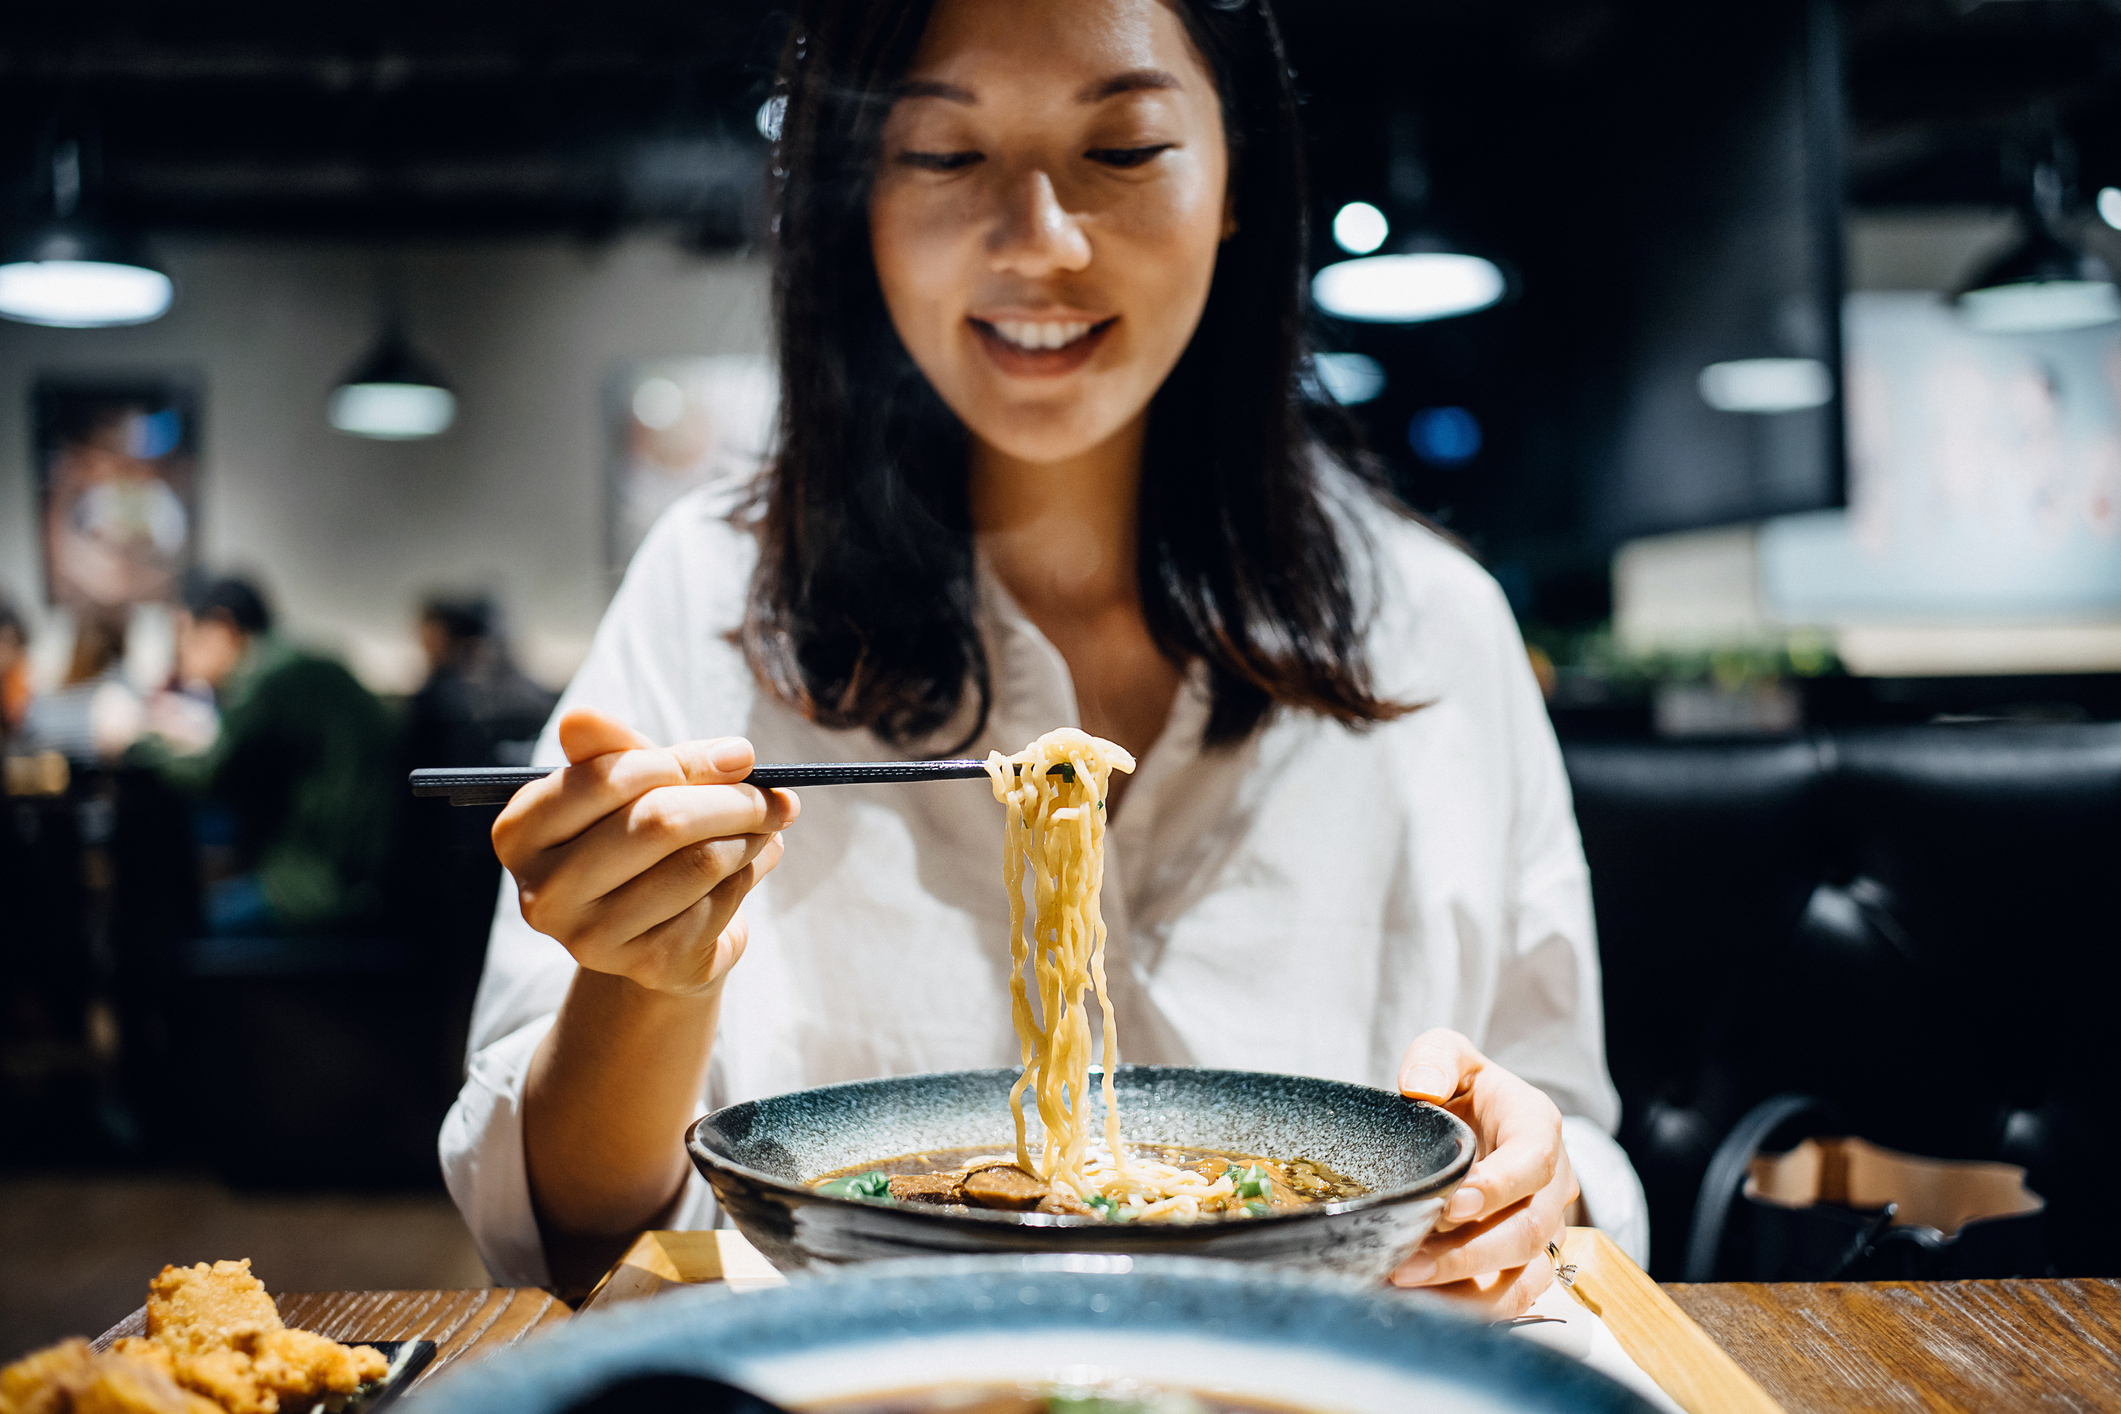 A woman is eating a bowl of noodles